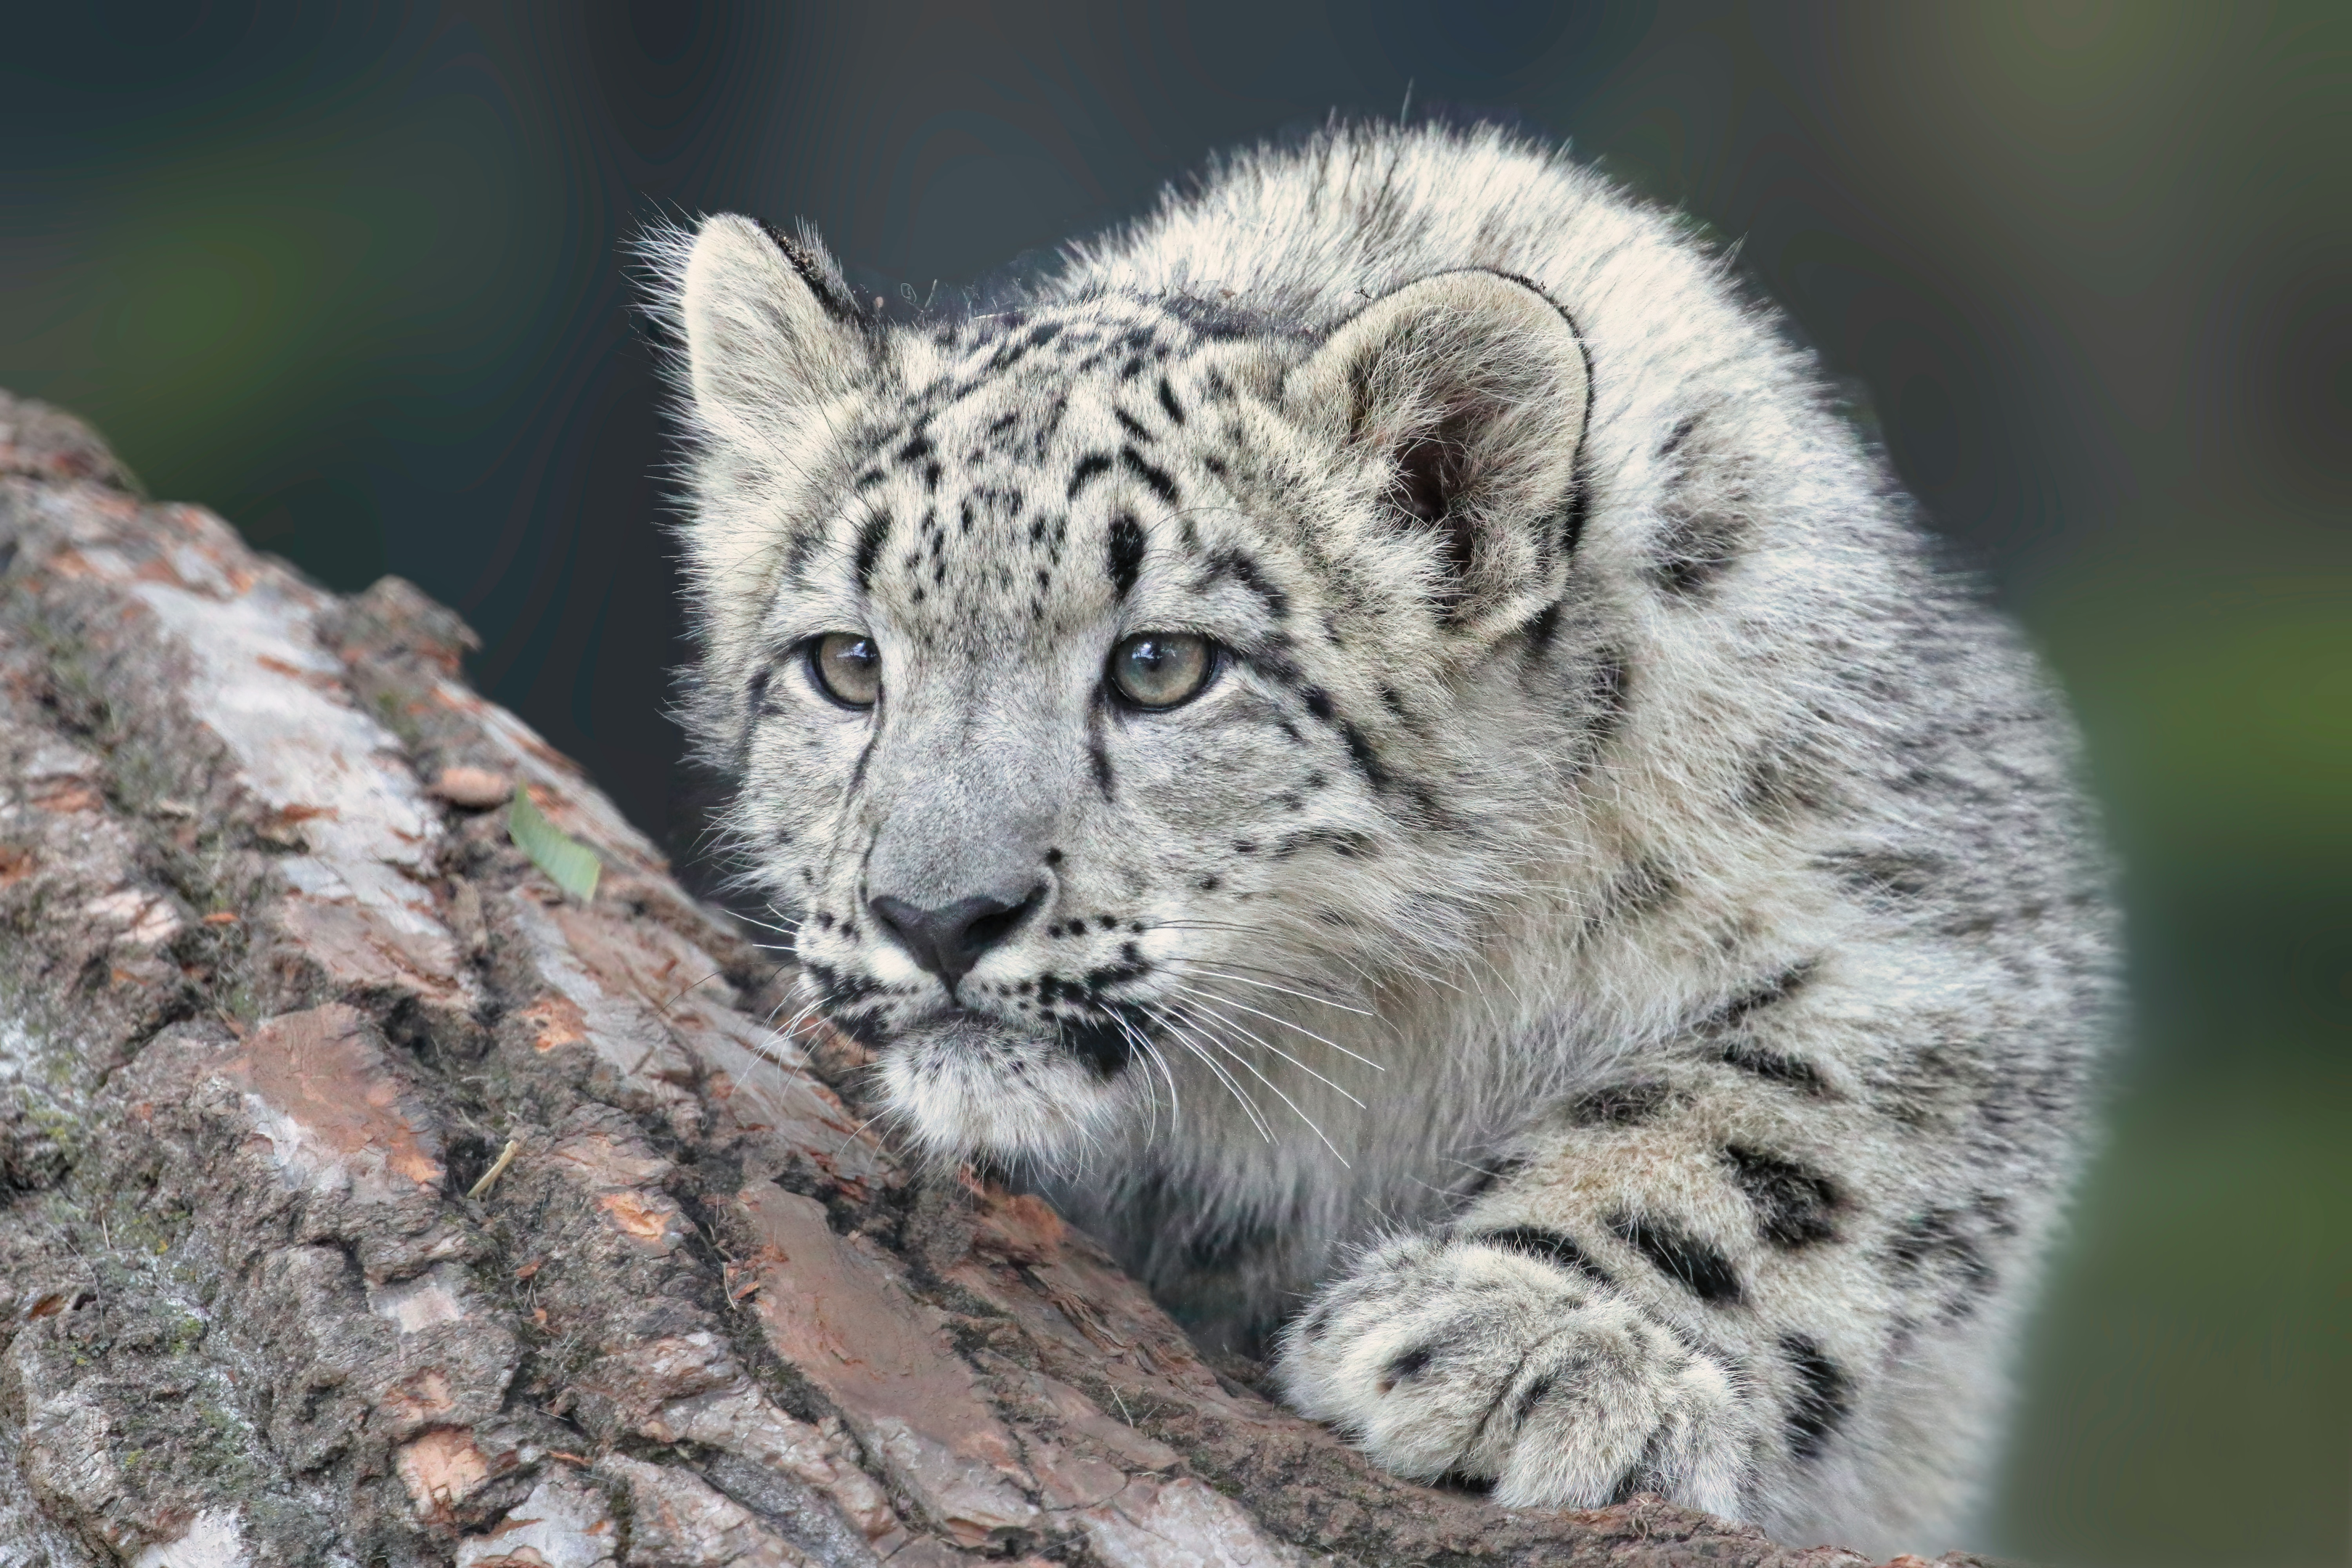 A snow leopard in the wild, looking out from a rocky outcrop